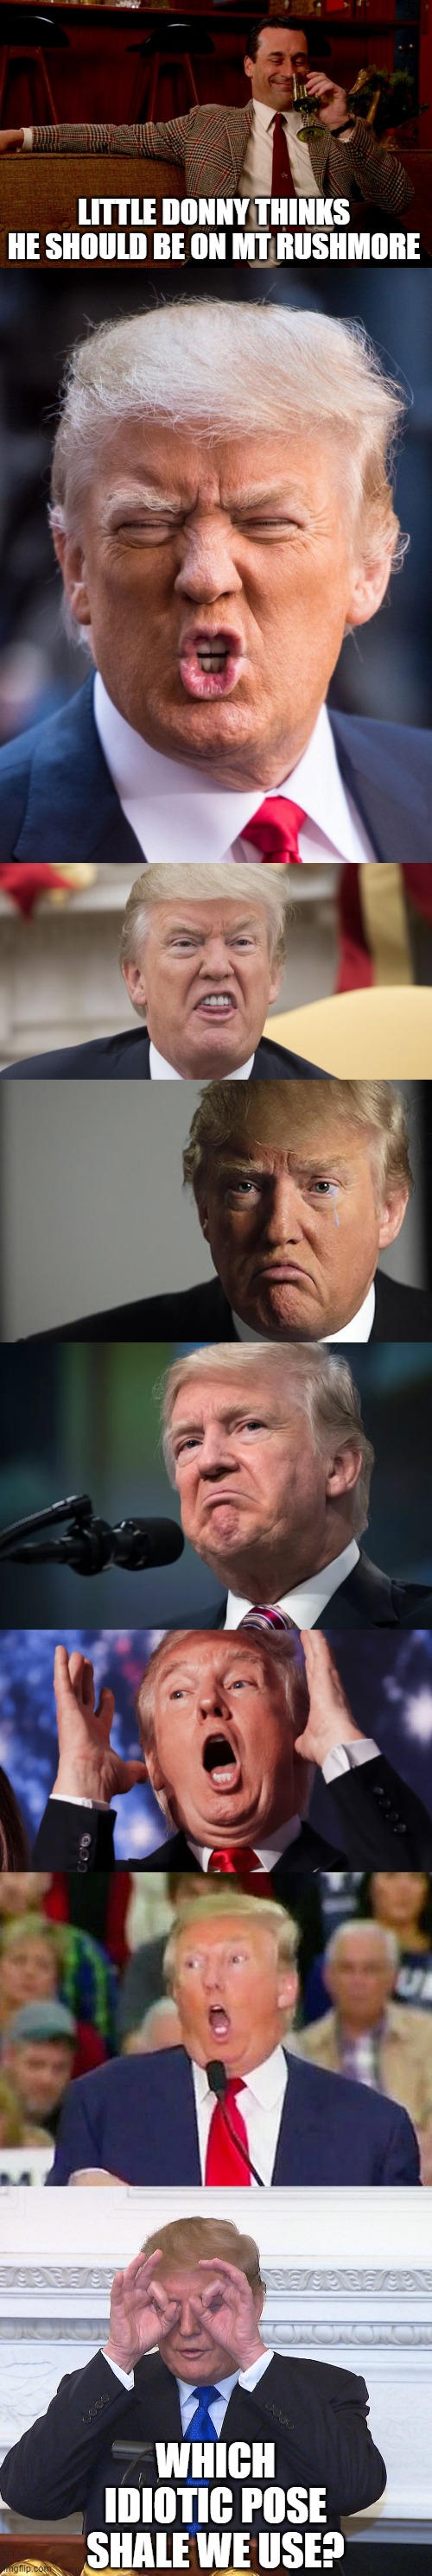 Yea, not too narcissistic | LITTLE DONNY THINKS HE SHOULD BE ON MT RUSHMORE; WHICH IDIOTIC POSE SHALE WE USE? | image tagged in memes,politics,maga,impeach trump,donald trump is an idiot,crying baby | made w/ Imgflip meme maker